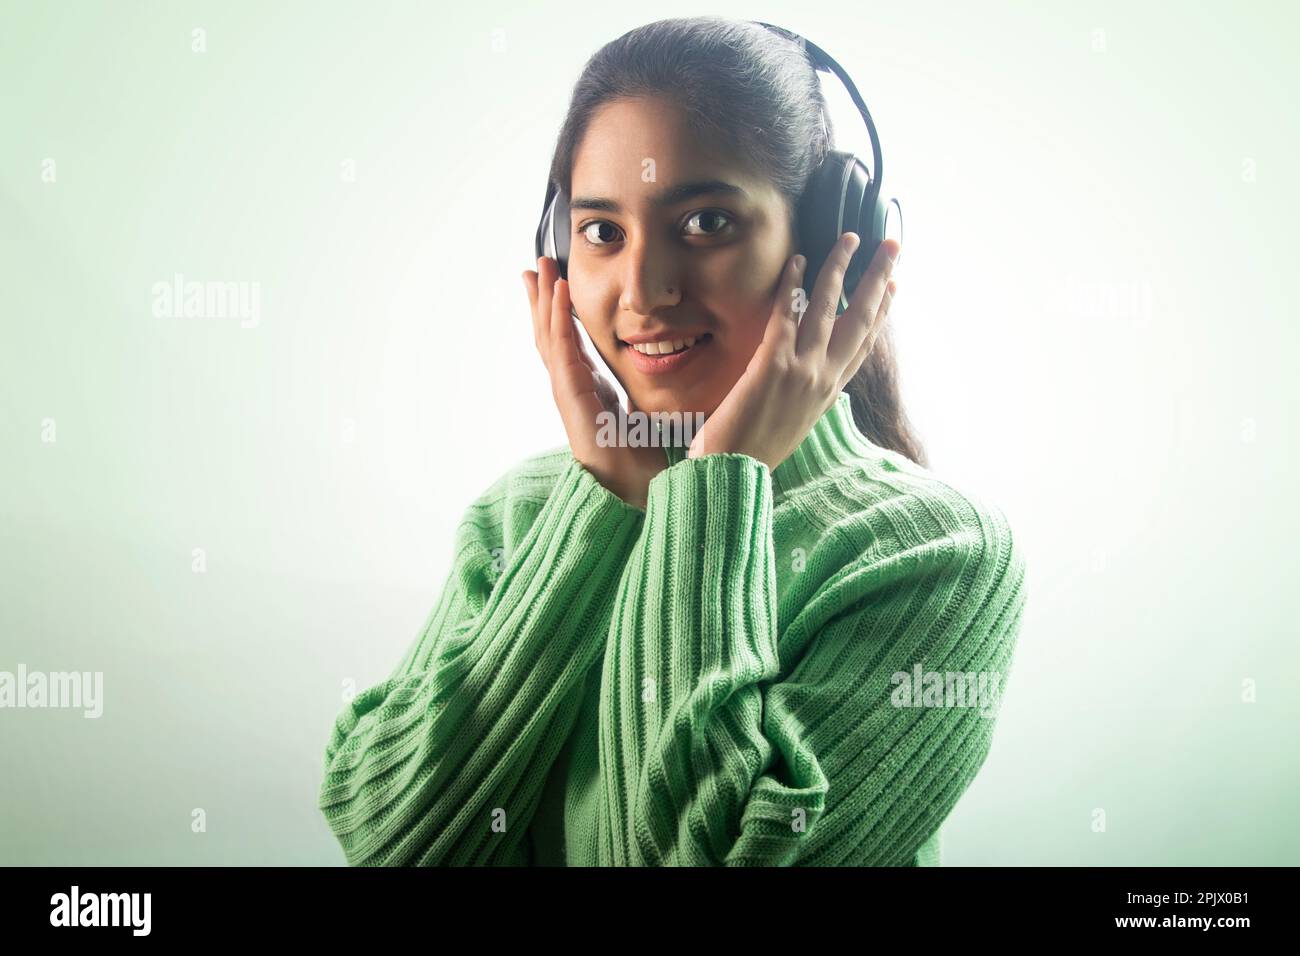 Portrait of a happy young woman listening music on headphones Stock Photo